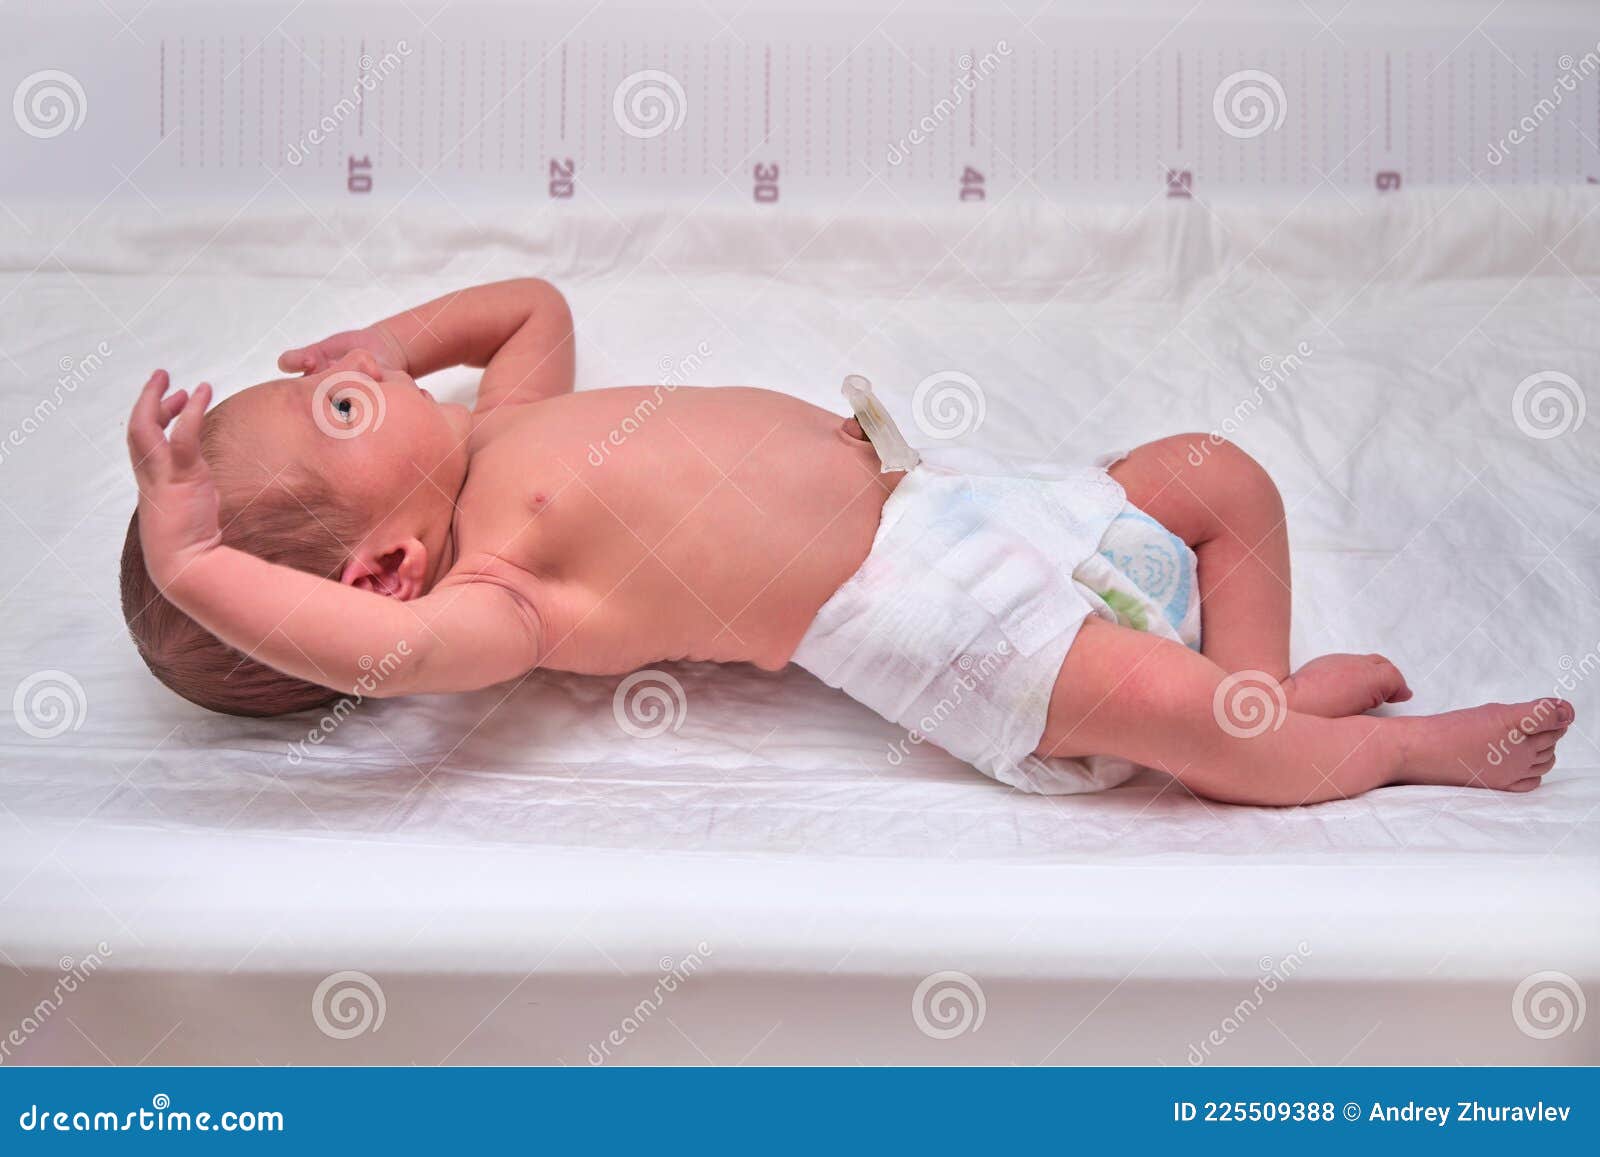 a newborn baby in diapers on a white changing table with a ruler for measuring full-length